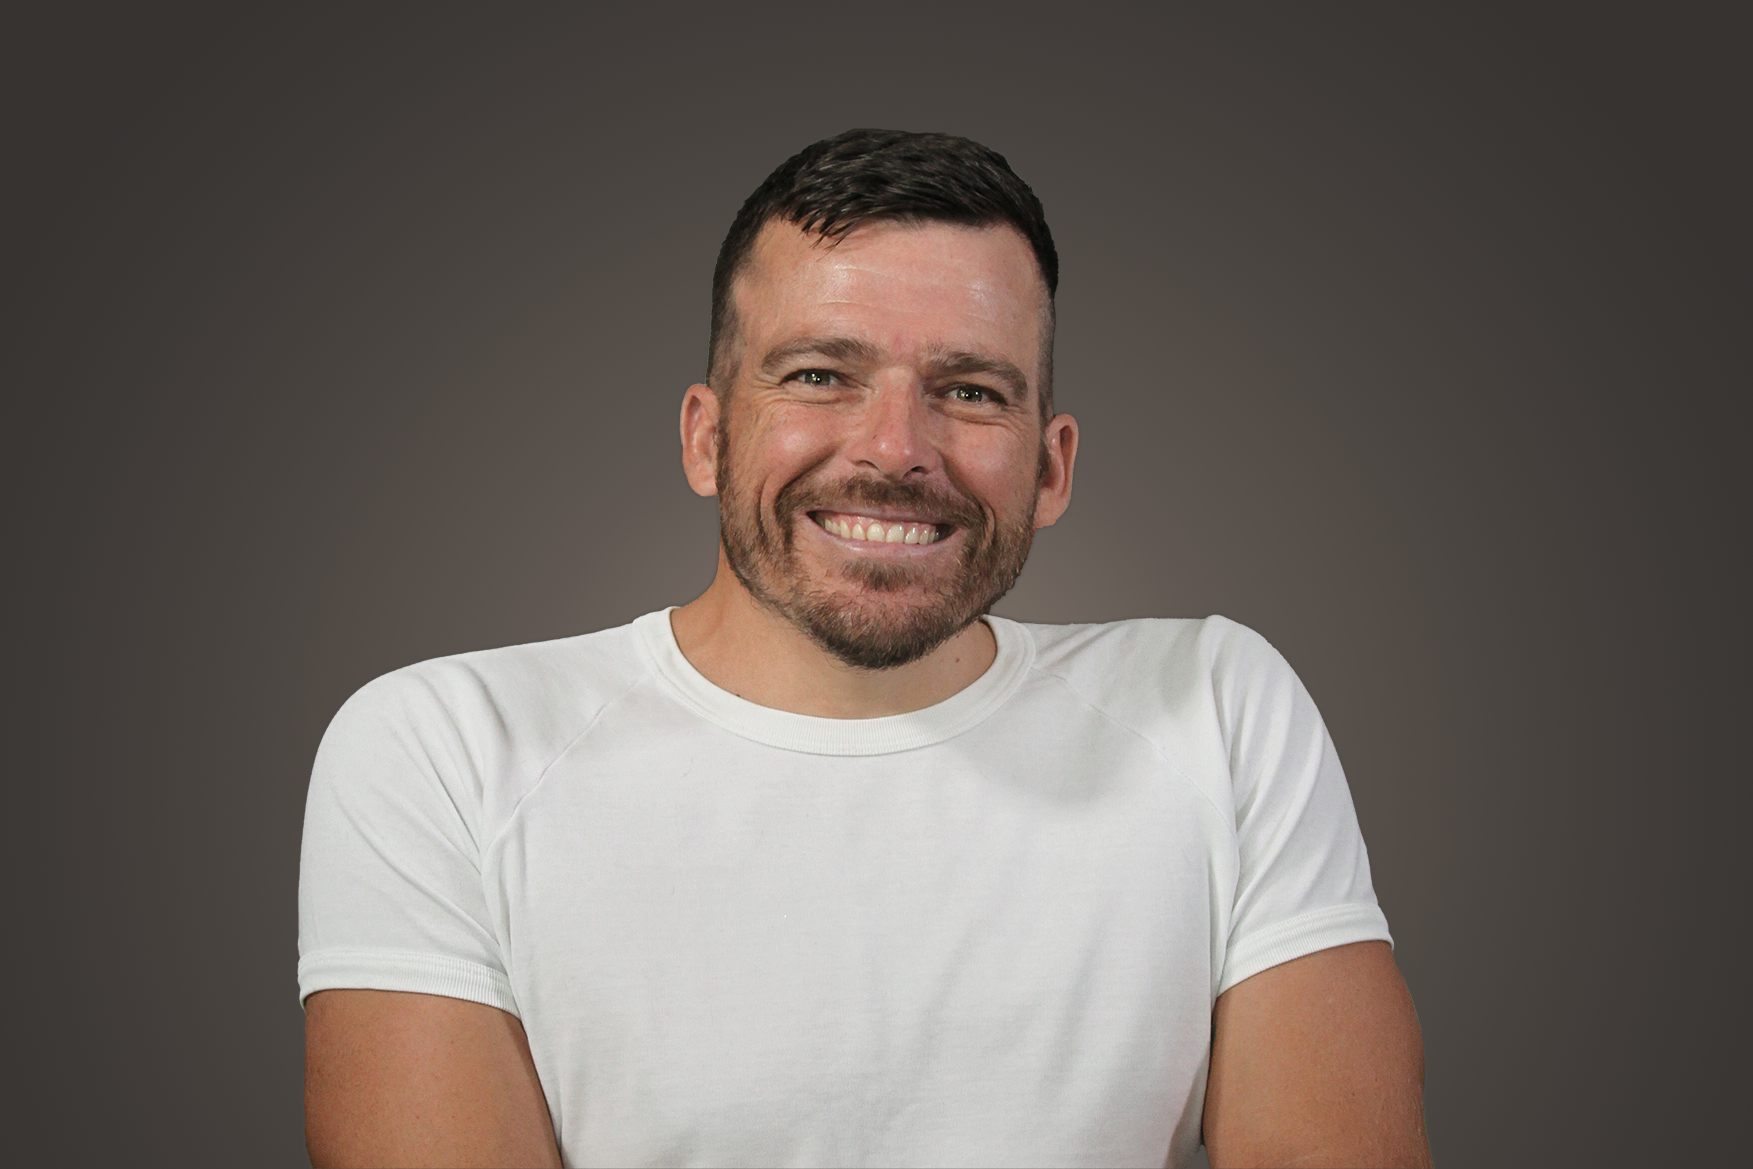 Kurt Fearnley is wearing a white t-shirt and smiling into the camera. He has facial hair and has a dark background.